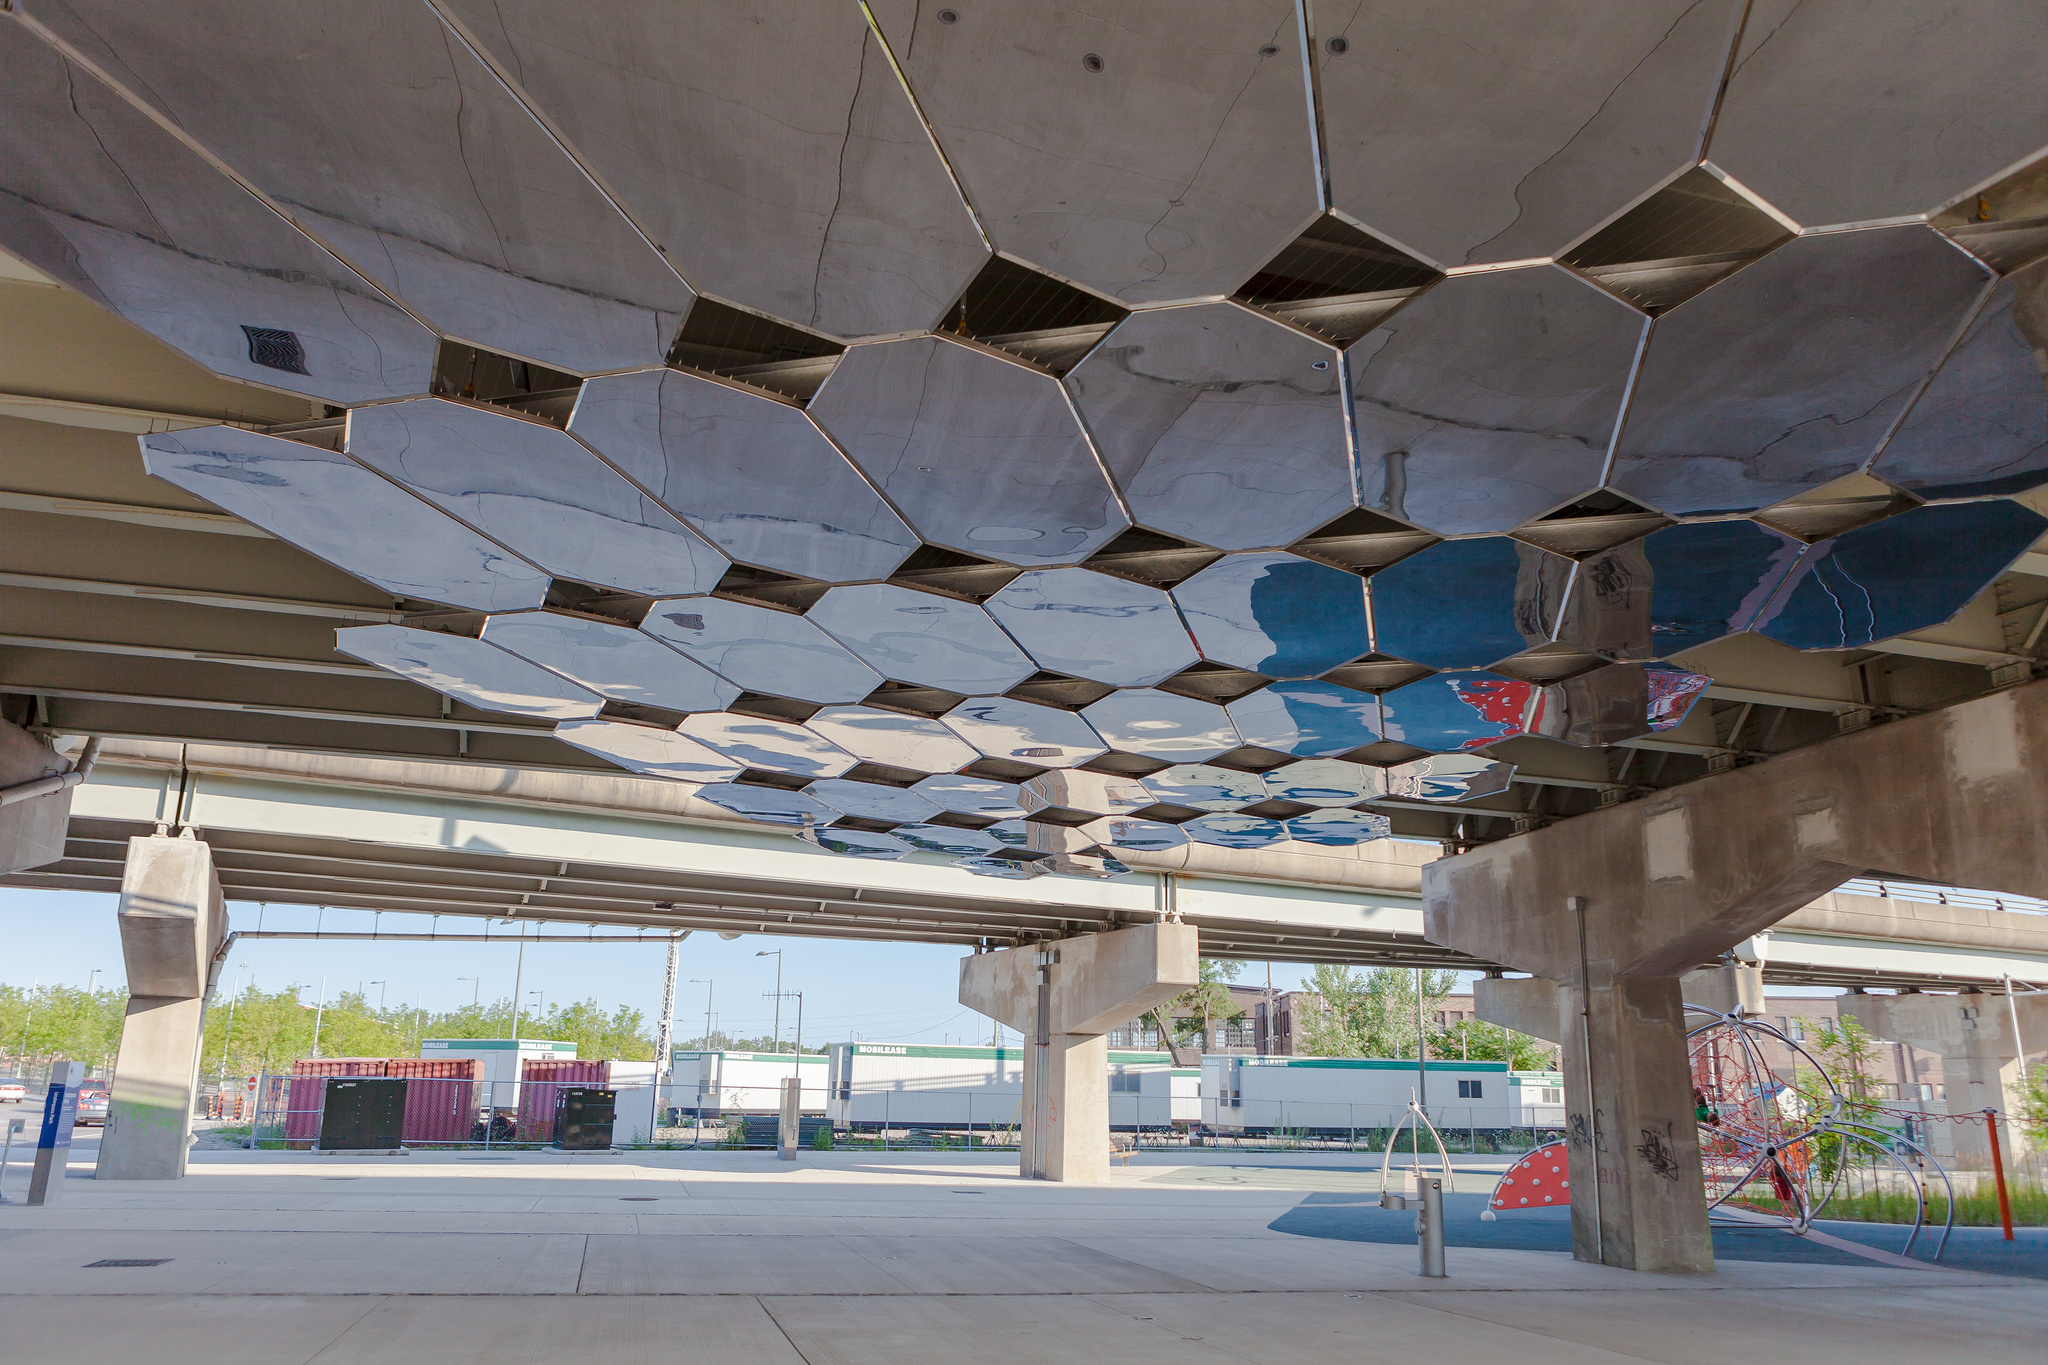 Another image of UnderPass Park and its art display.